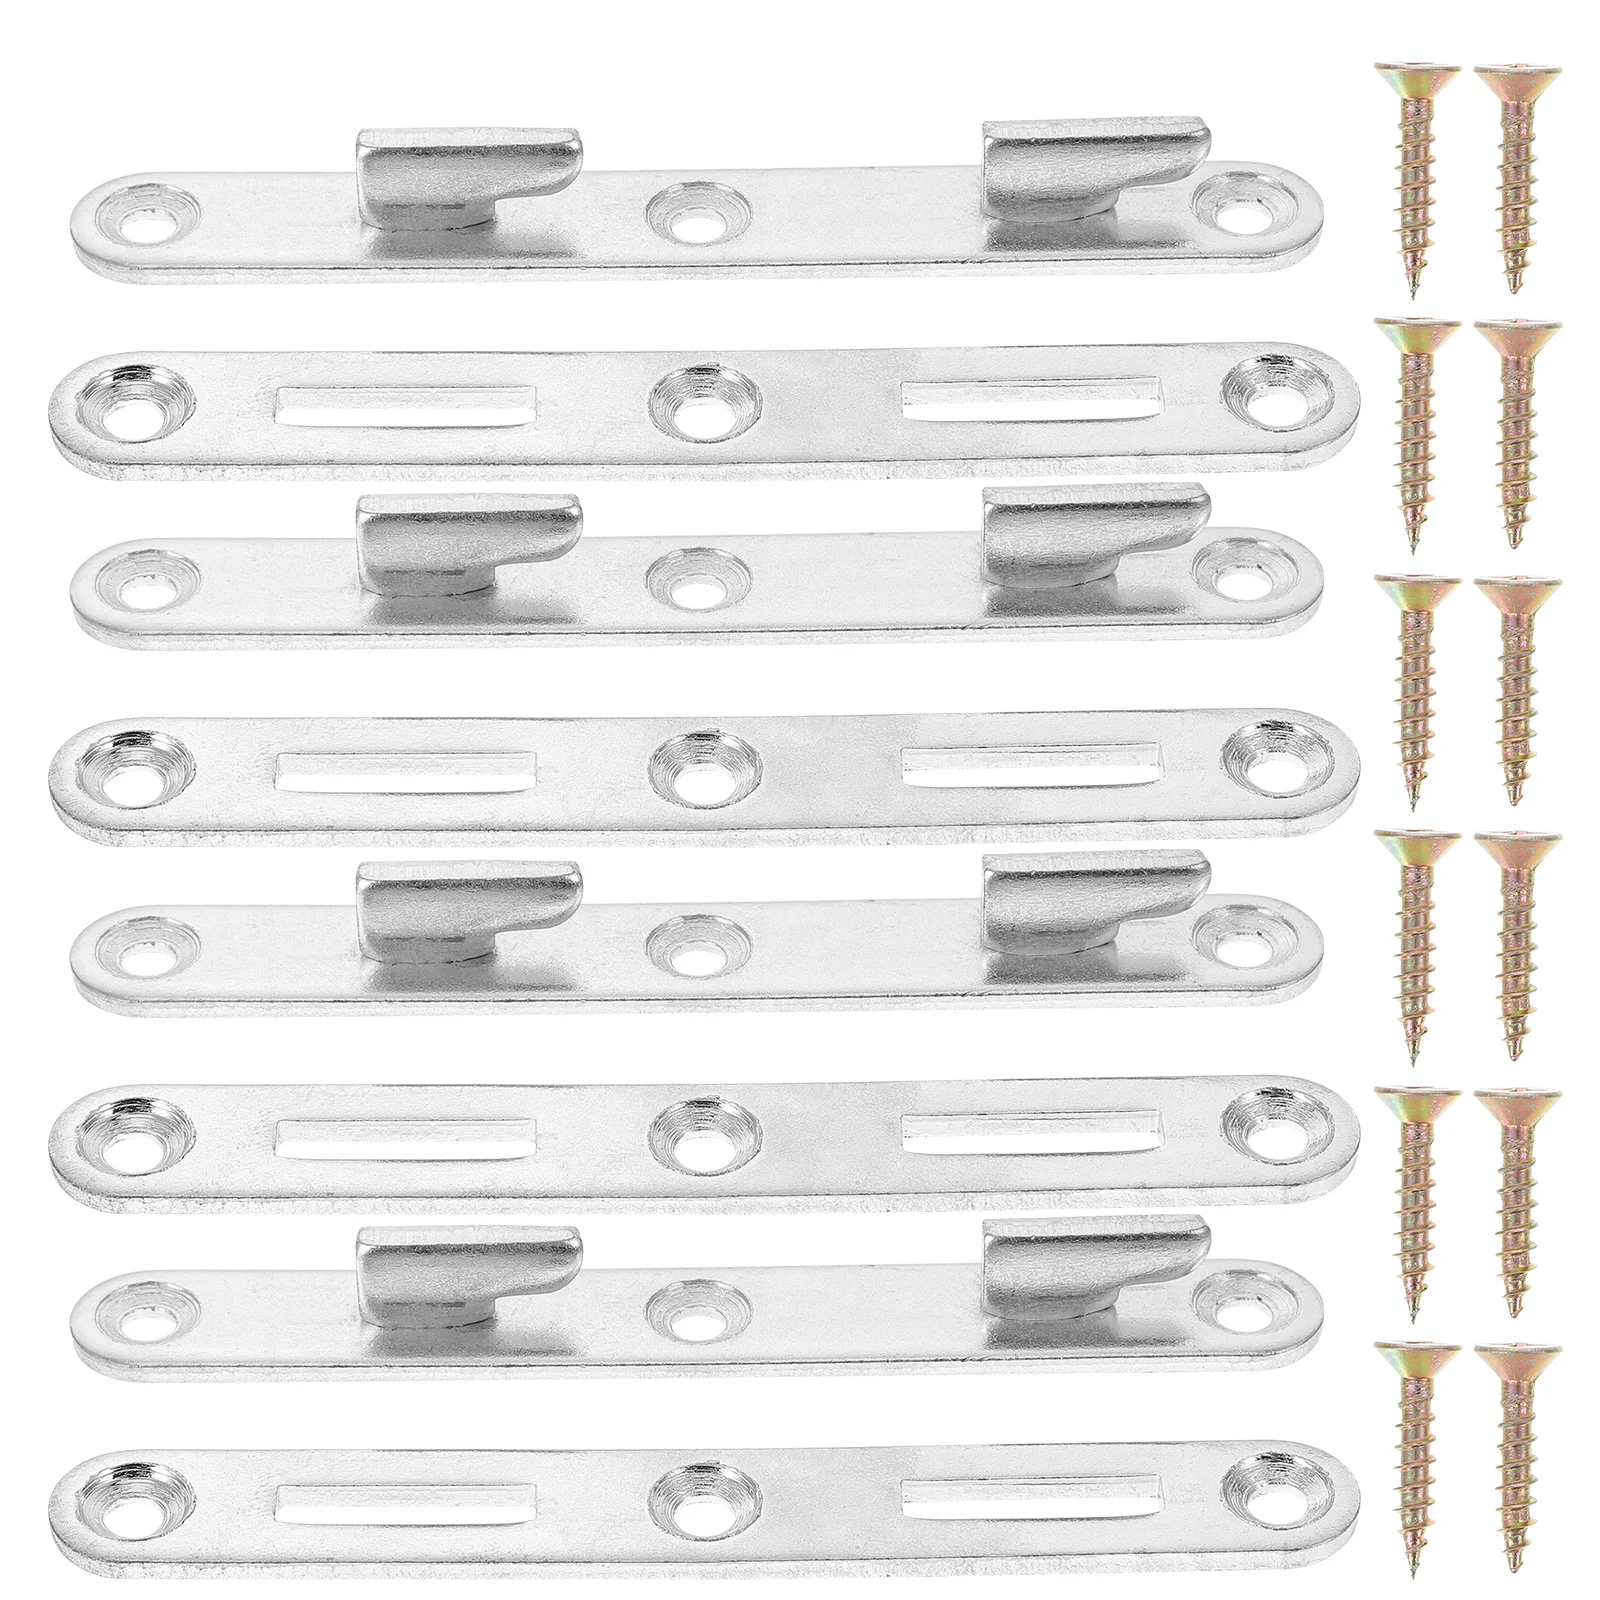 

4 Sets Wood Bed Rail Connecting Fittings Bed Rail Bracket Bed Rail Fasteners Furniture Bed with Screws for Connecting to Wood